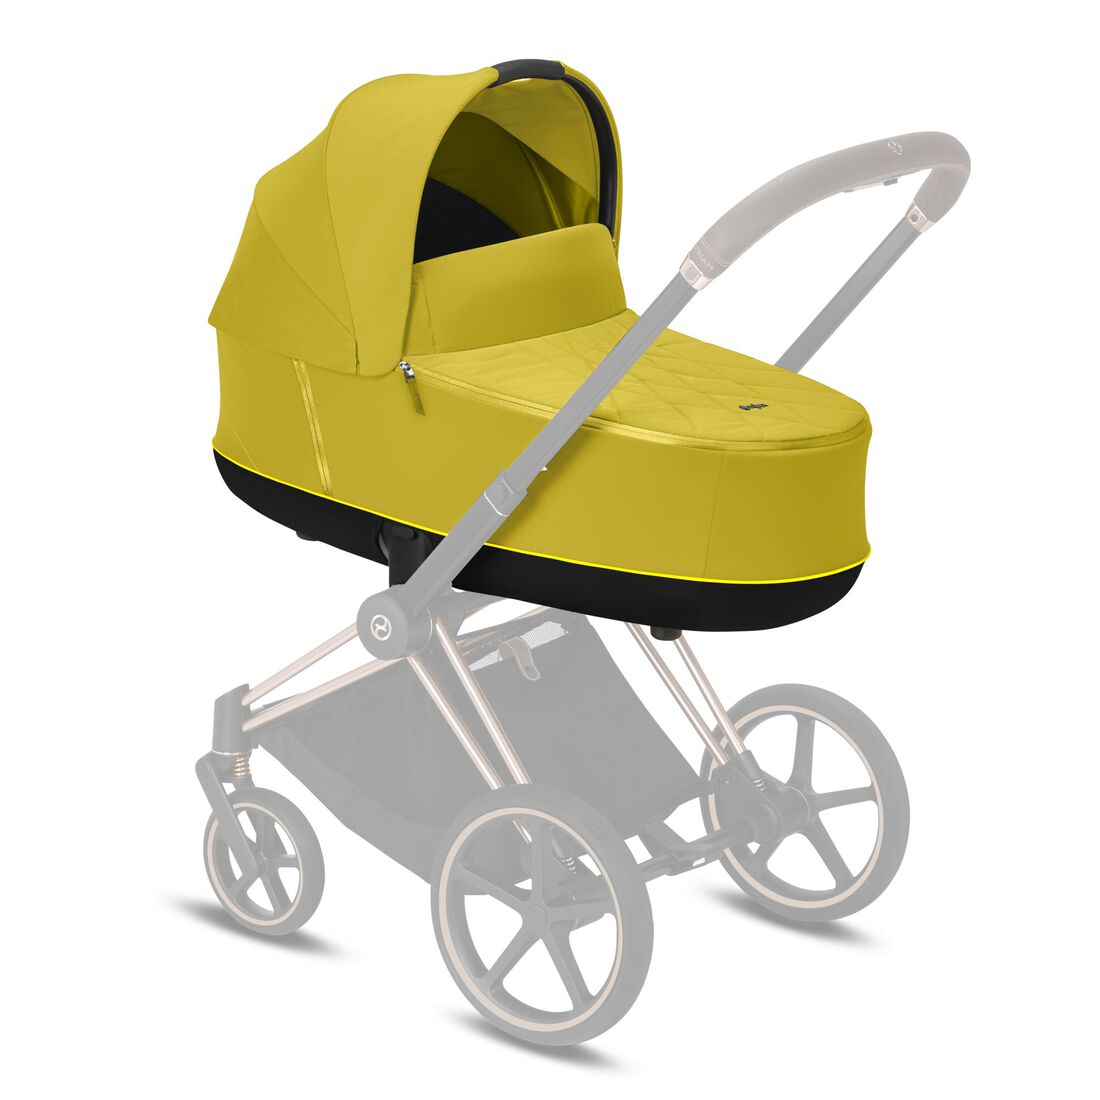 CYBEX Priam 3 Lux Carry Cot - Mustard Yellow in Mustard Yellow large image number 5